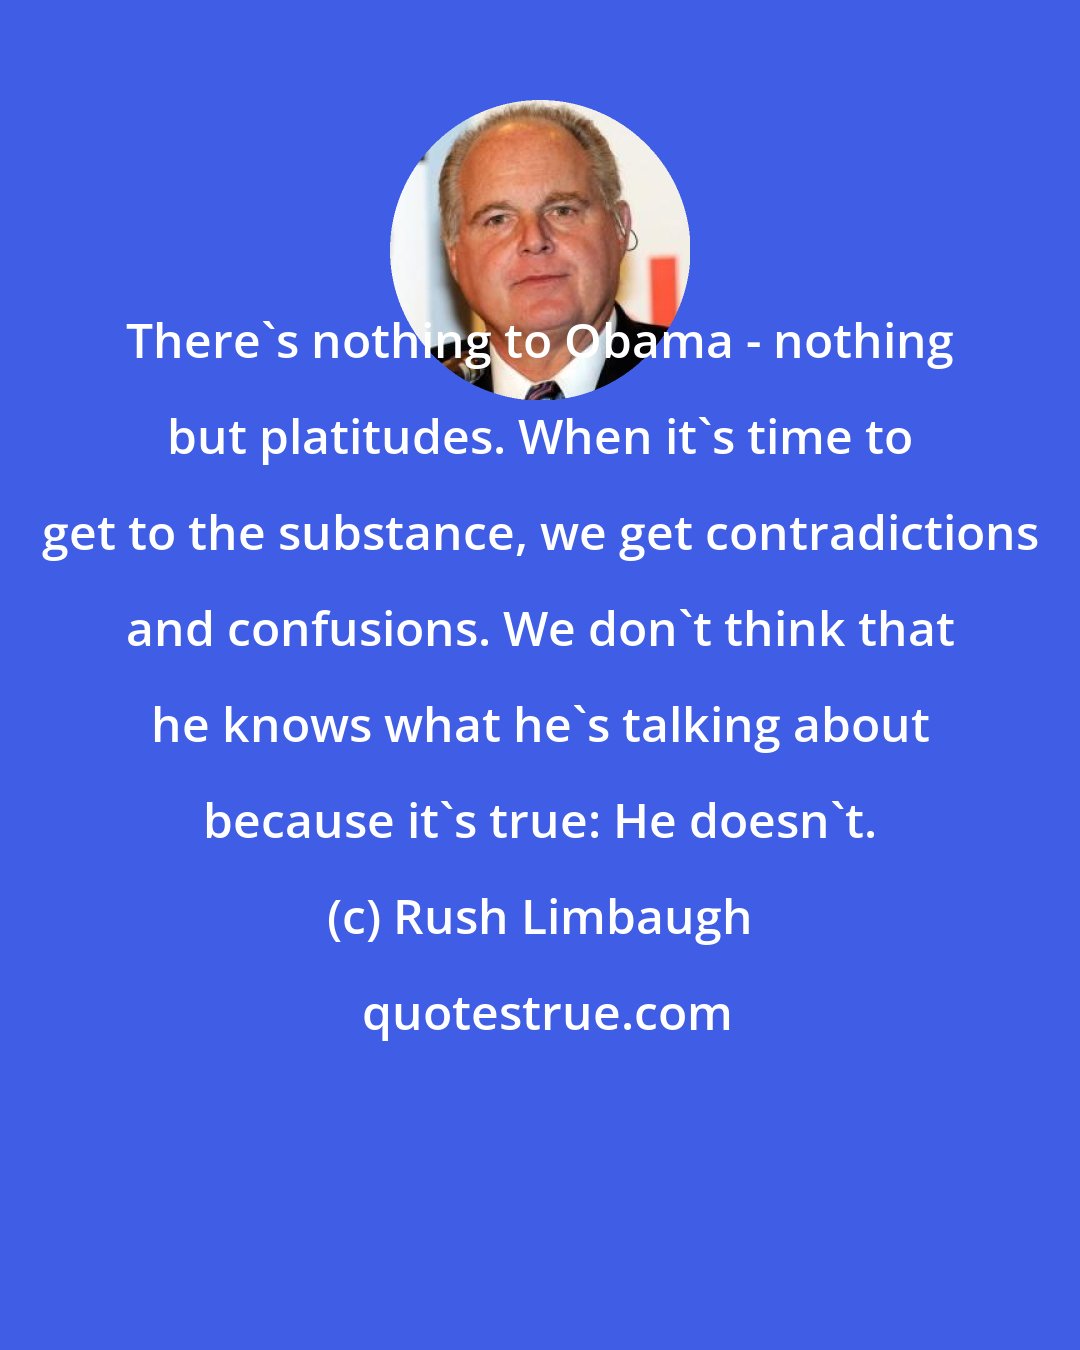 Rush Limbaugh: There's nothing to Obama - nothing but platitudes. When it's time to get to the substance, we get contradictions and confusions. We don't think that he knows what he's talking about because it's true: He doesn't.